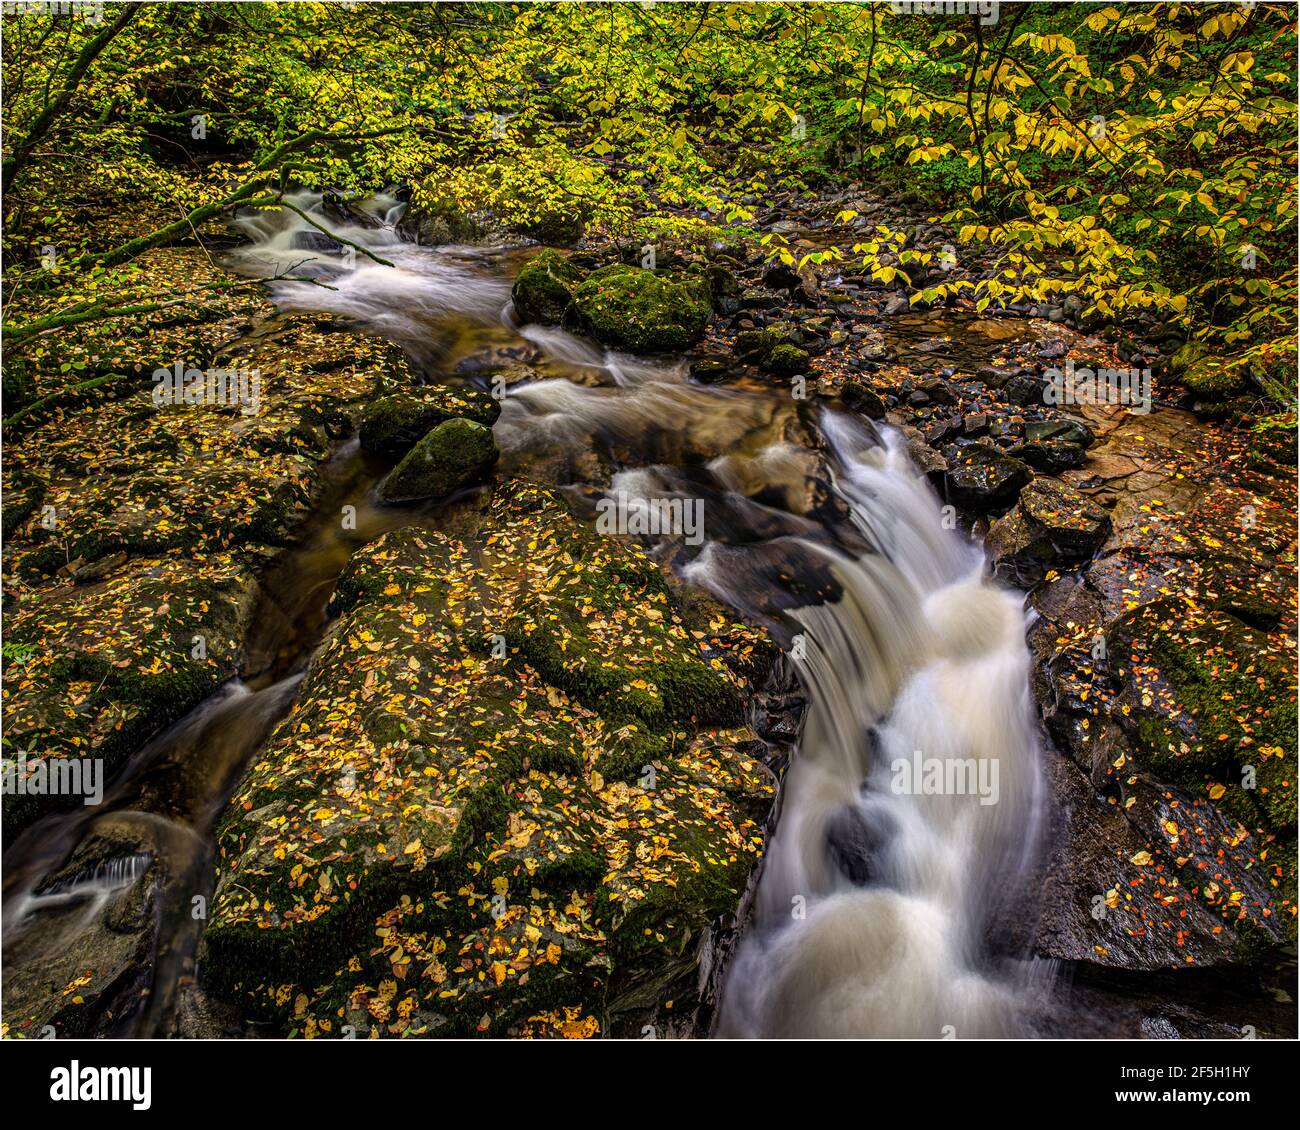 Small waterfalls in the Moness gorge at the Birks o Aberfeldy in the Perthshire countryside, Scottish Highlands Stock Photo